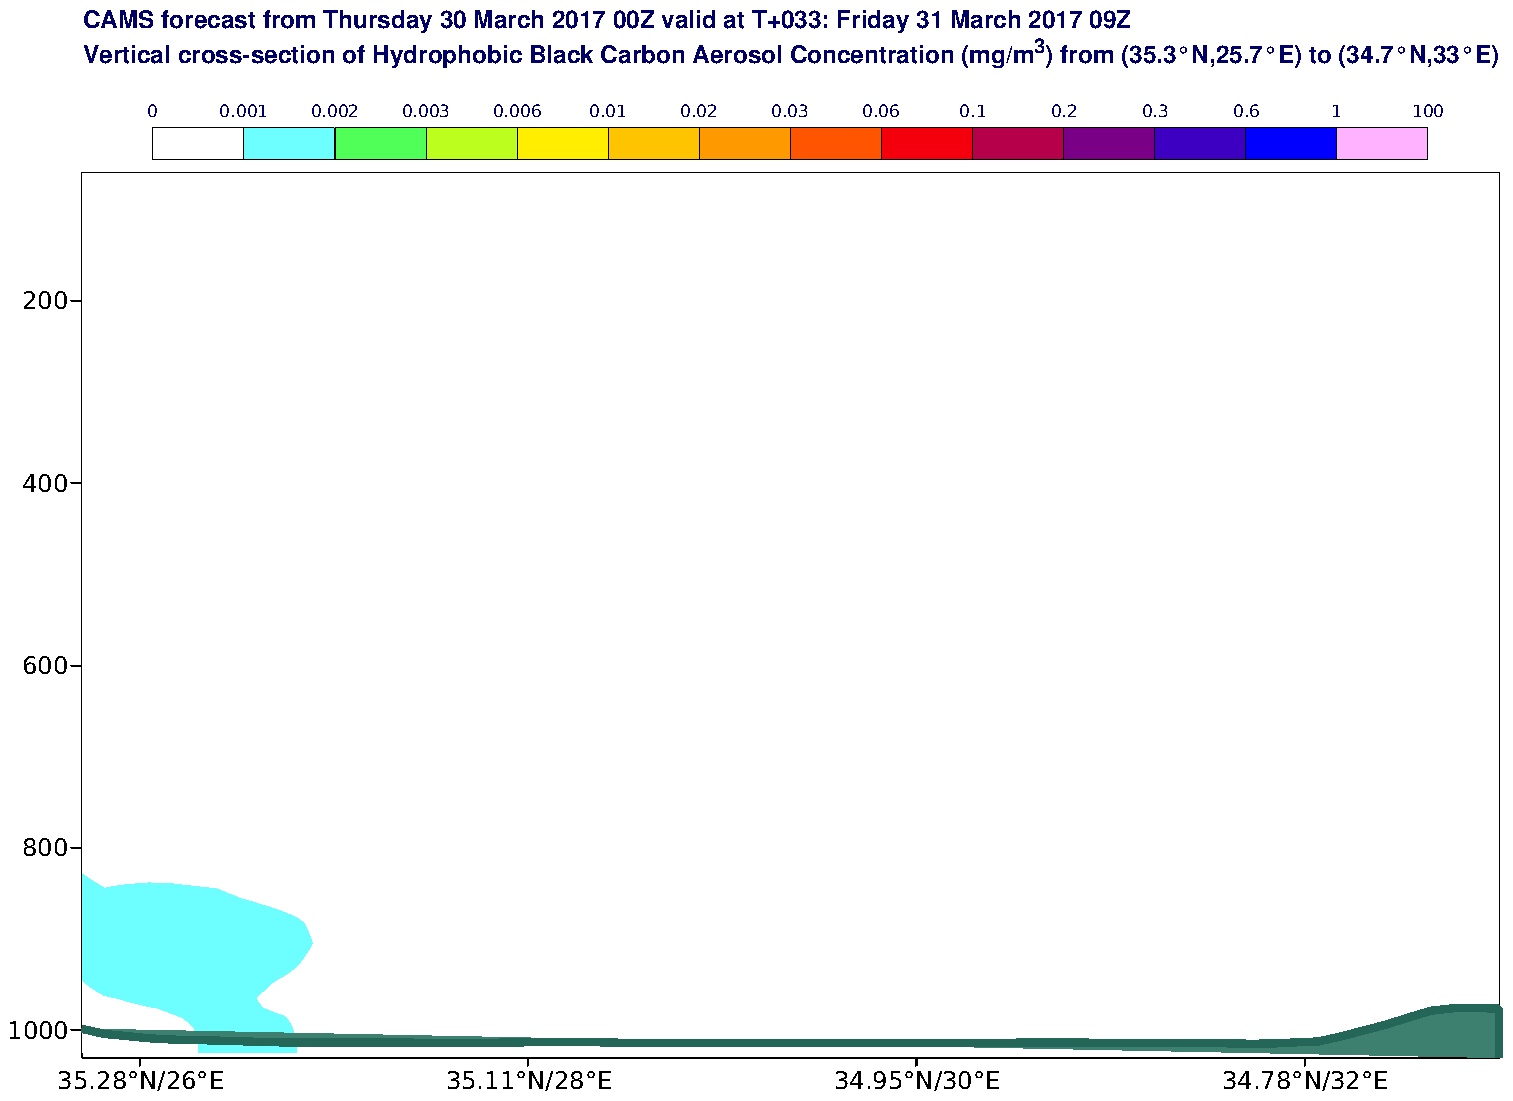 Vertical cross-section of Hydrophobic Black Carbon Aerosol Concentration (mg/m3) valid at T33 - 2017-03-31 09:00